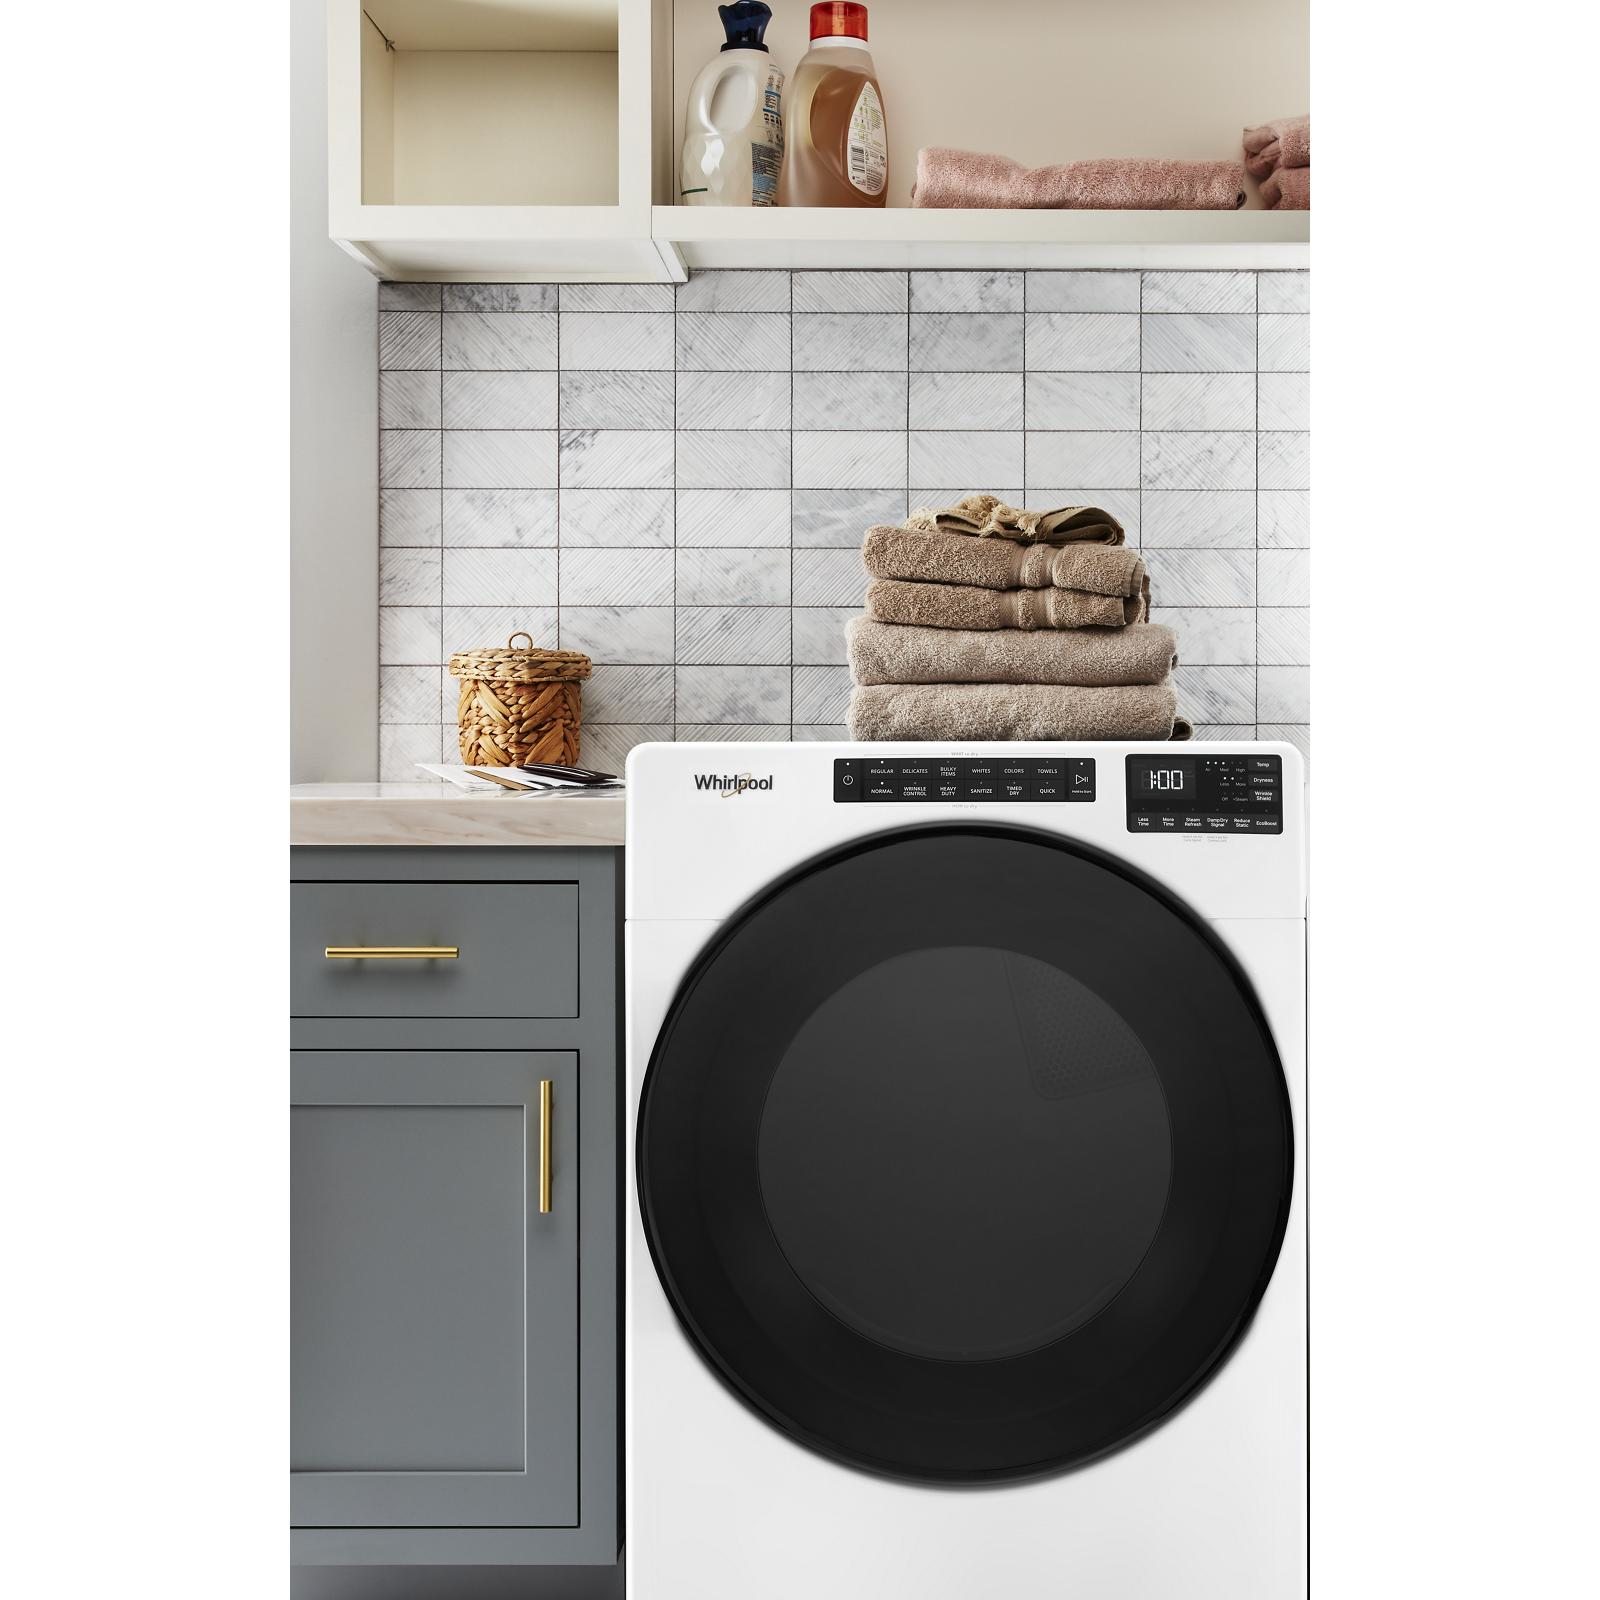 Whirlpool - 7.4 cu. Ft  Electric Dryer in White - YWED6605MW